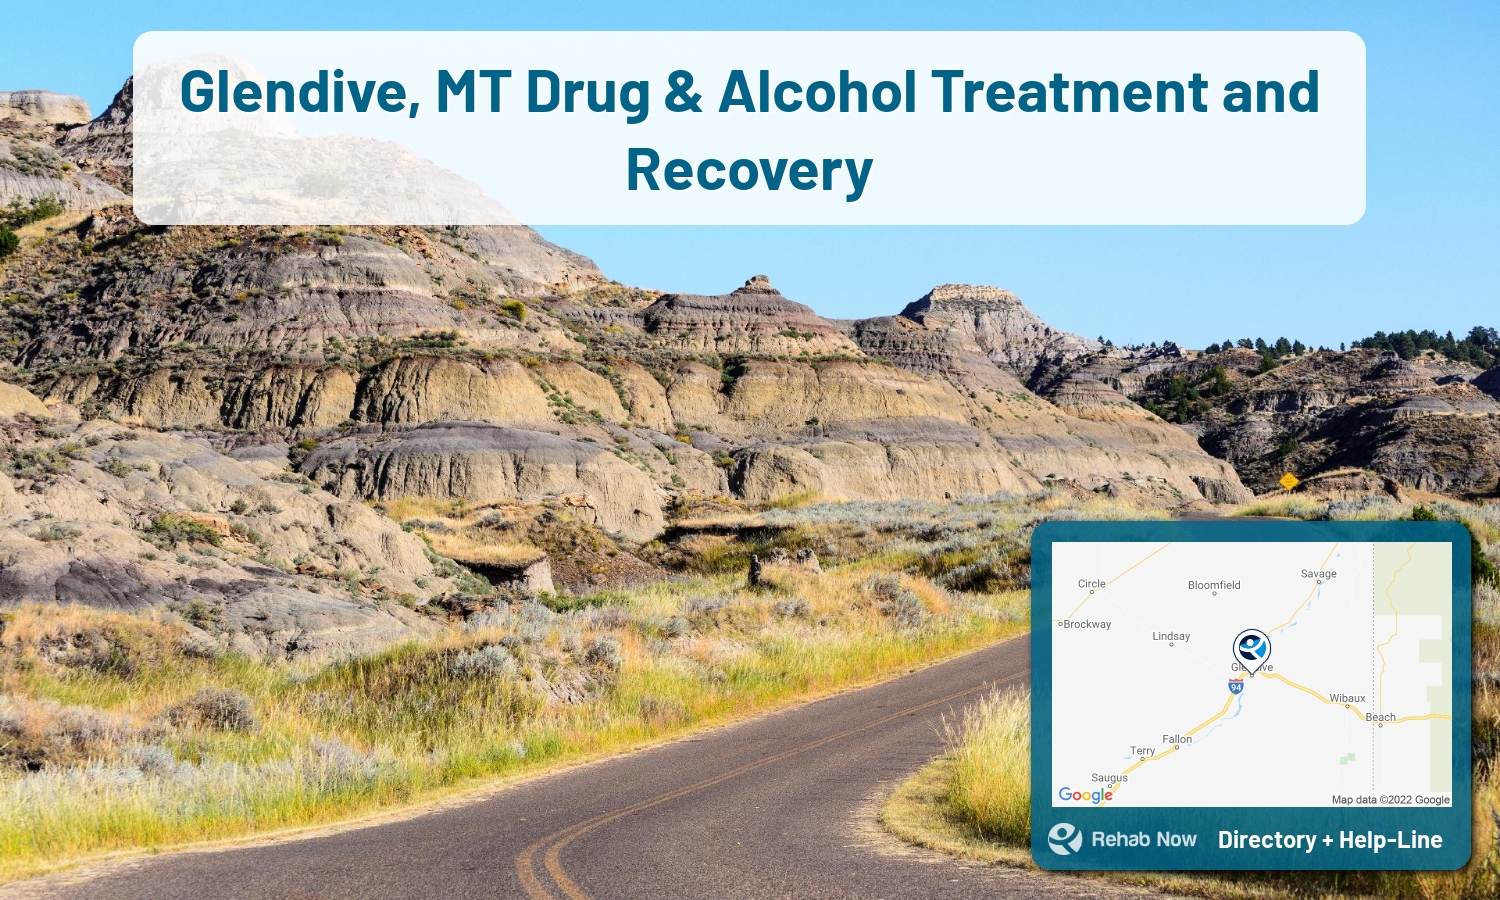 List of alcohol and drug treatment centers near you in Glendive, Montana. Research certifications, programs, methods, pricing, and more.